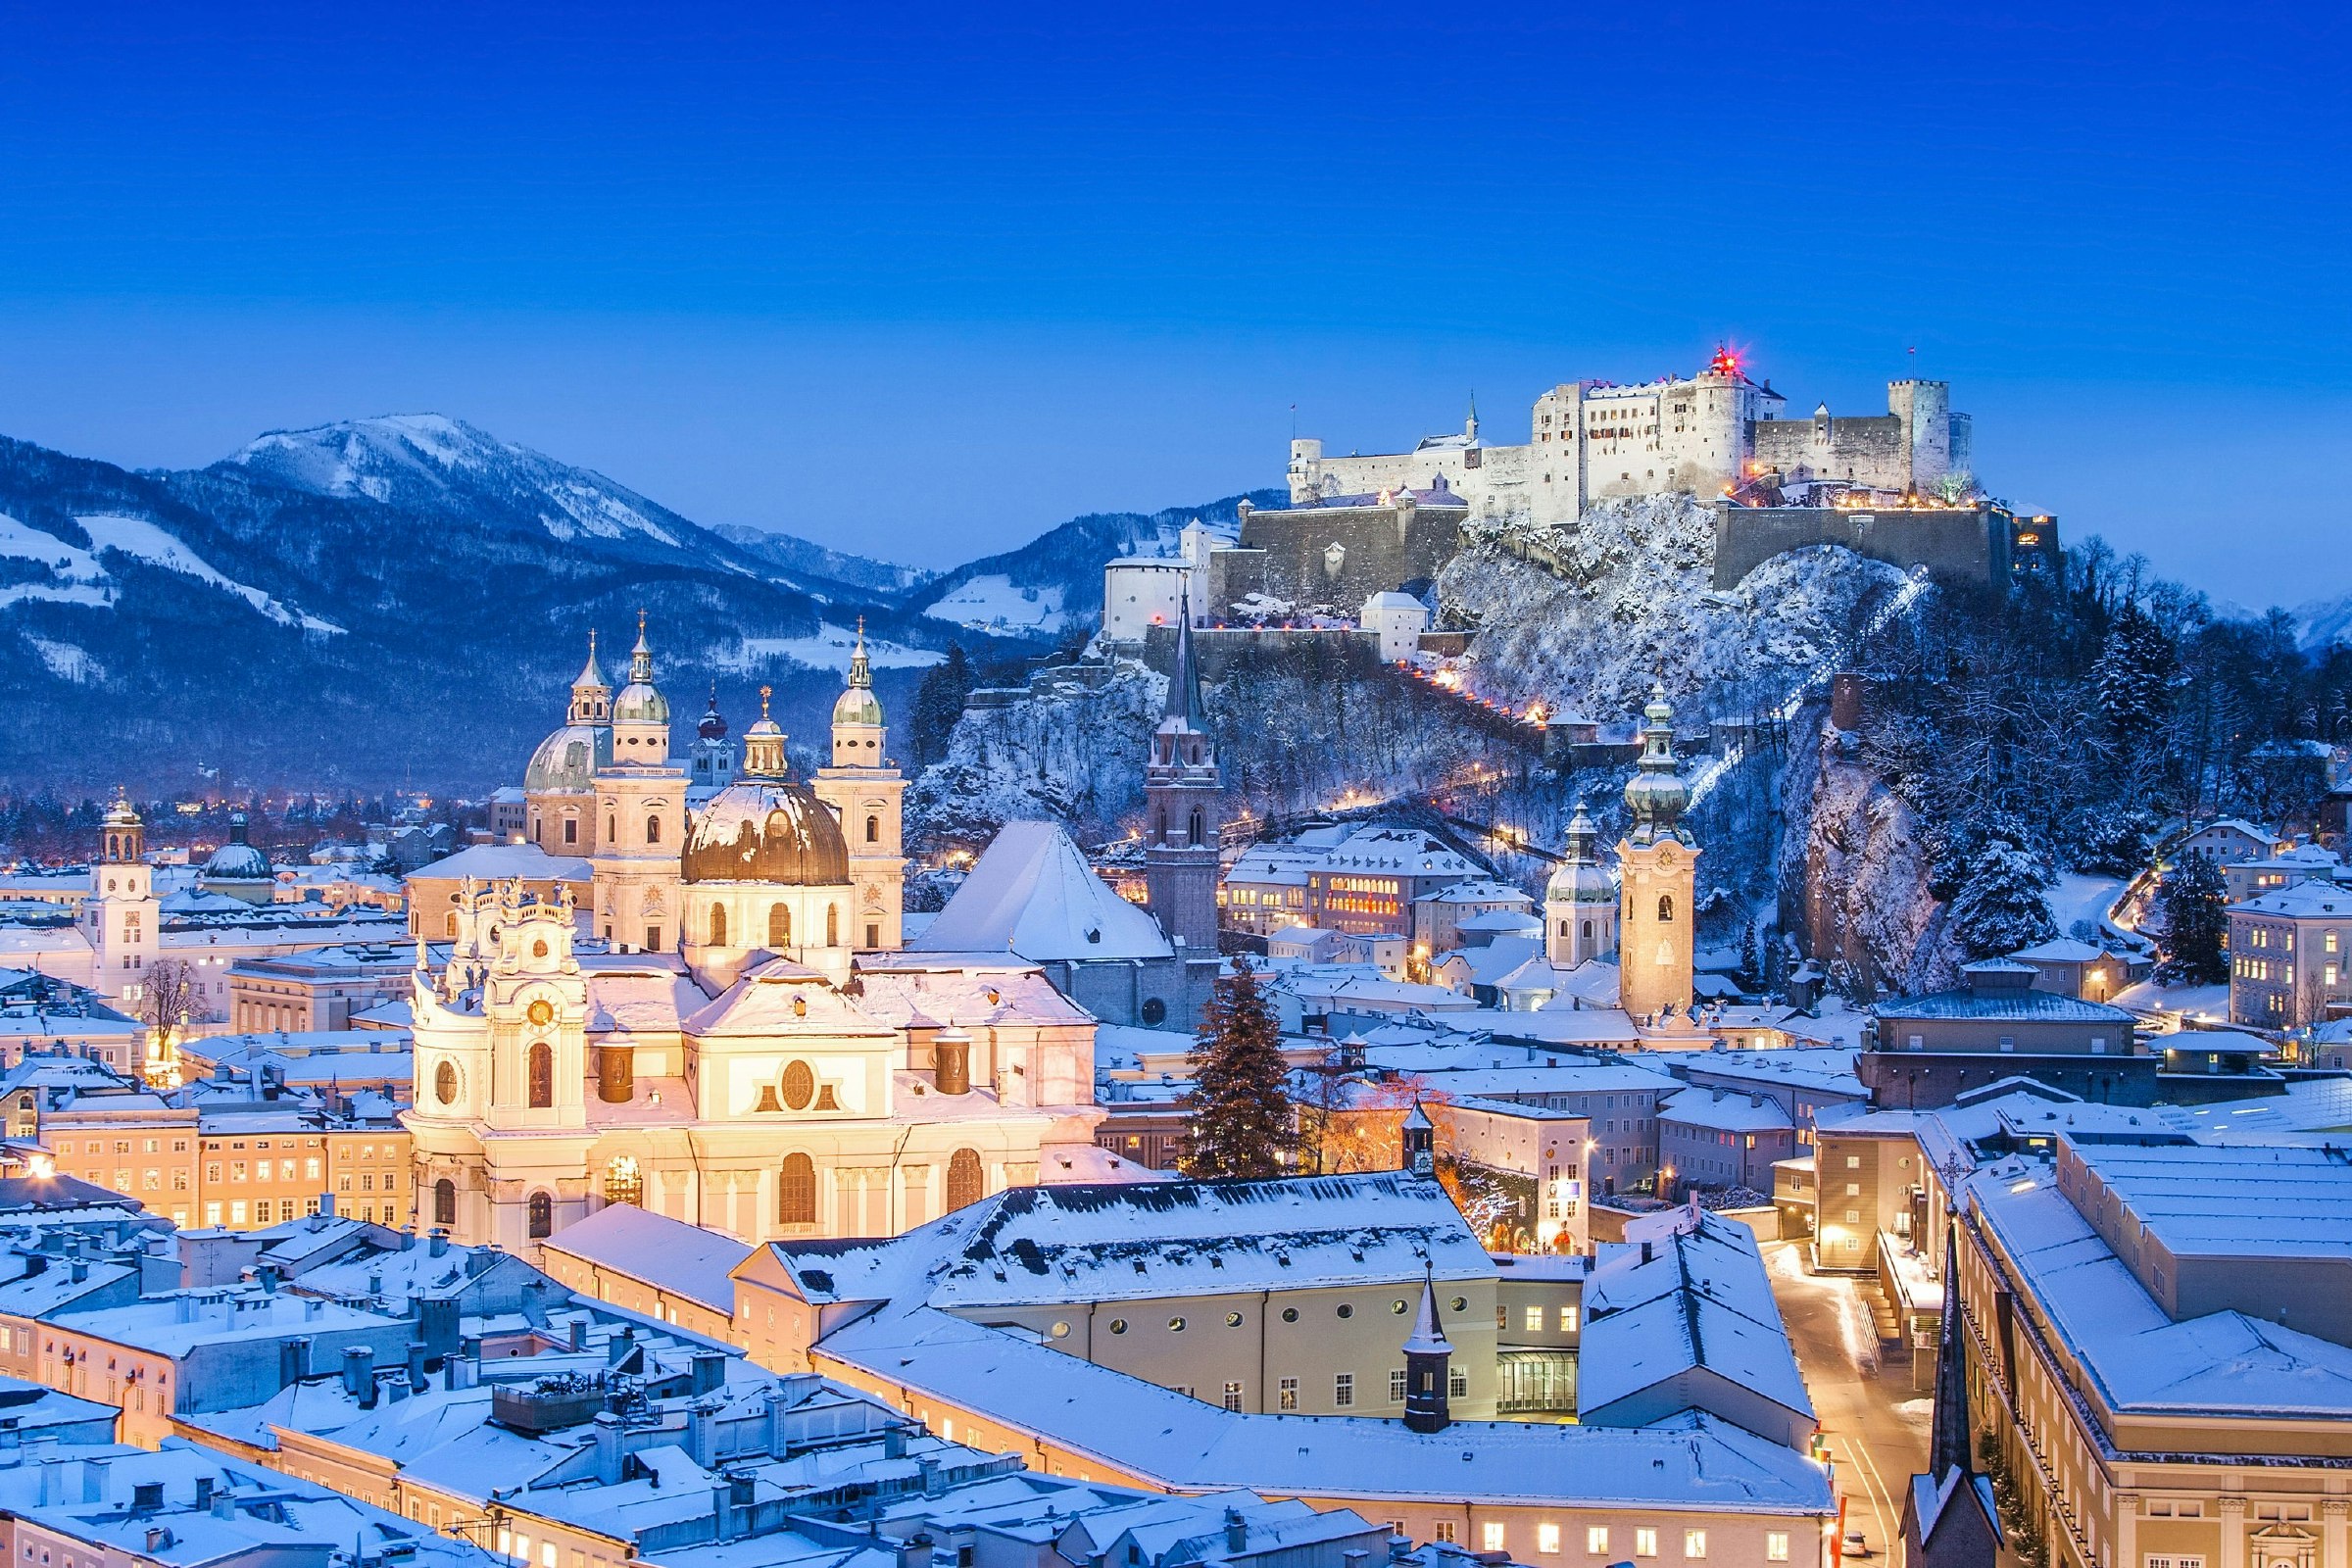 View of the city of Salzburg near dark, with snow-covered Alps in the background.